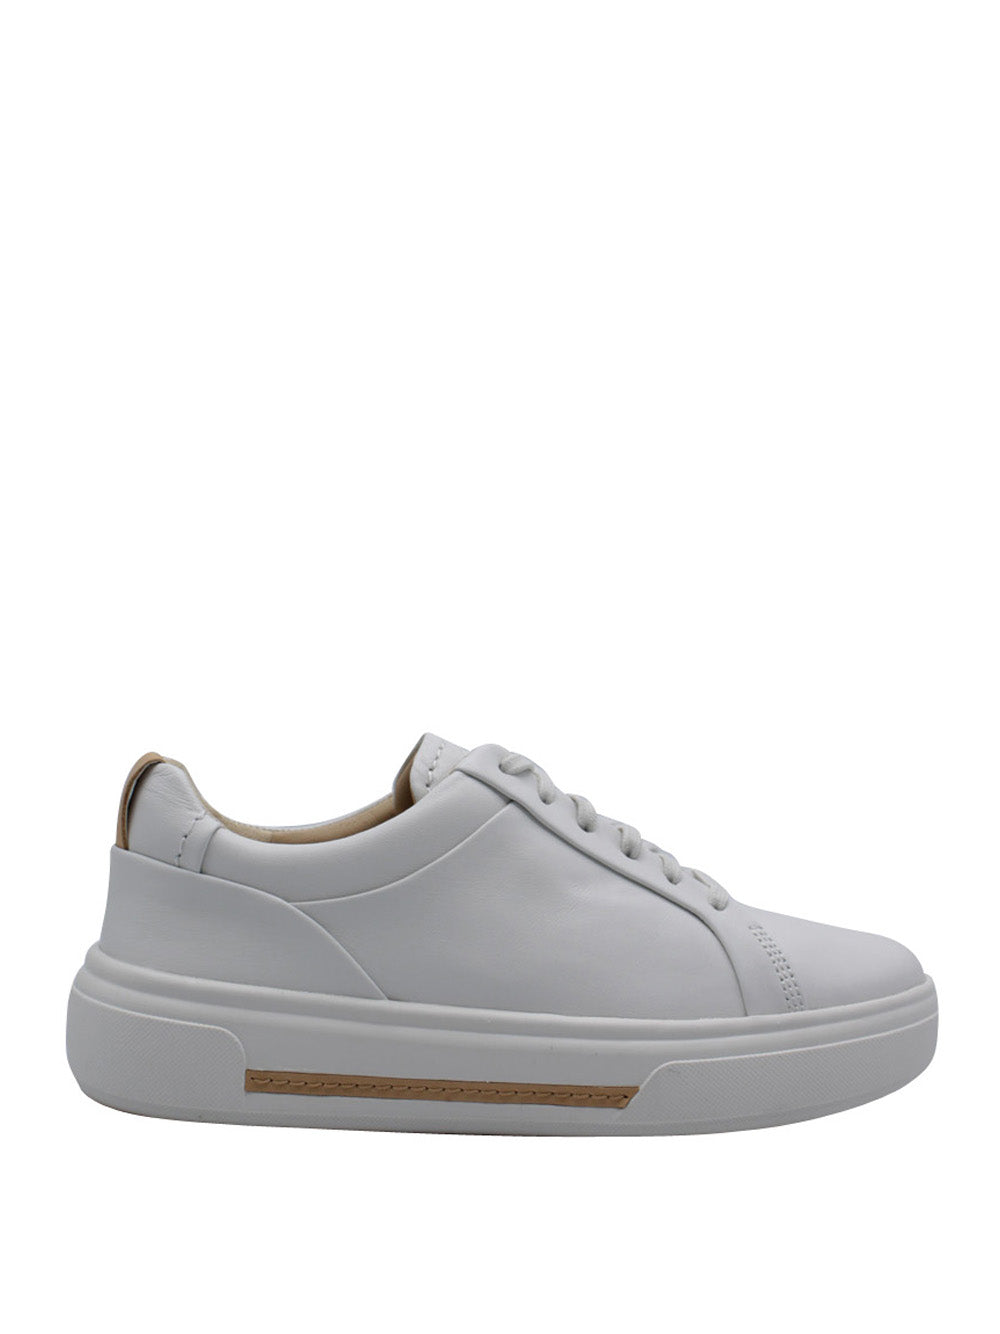 CLARKS Sneakers Donna - Bianco